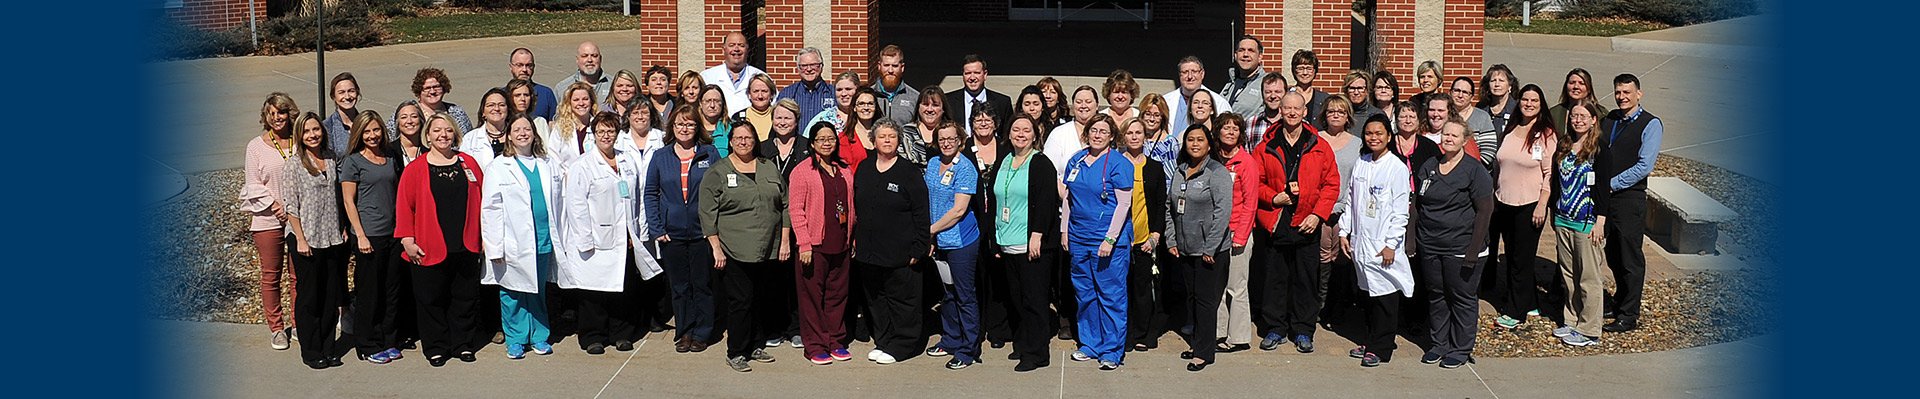 Banner picture of Washington County Hospital and Clinics Hospital Staff standing outside smiling.